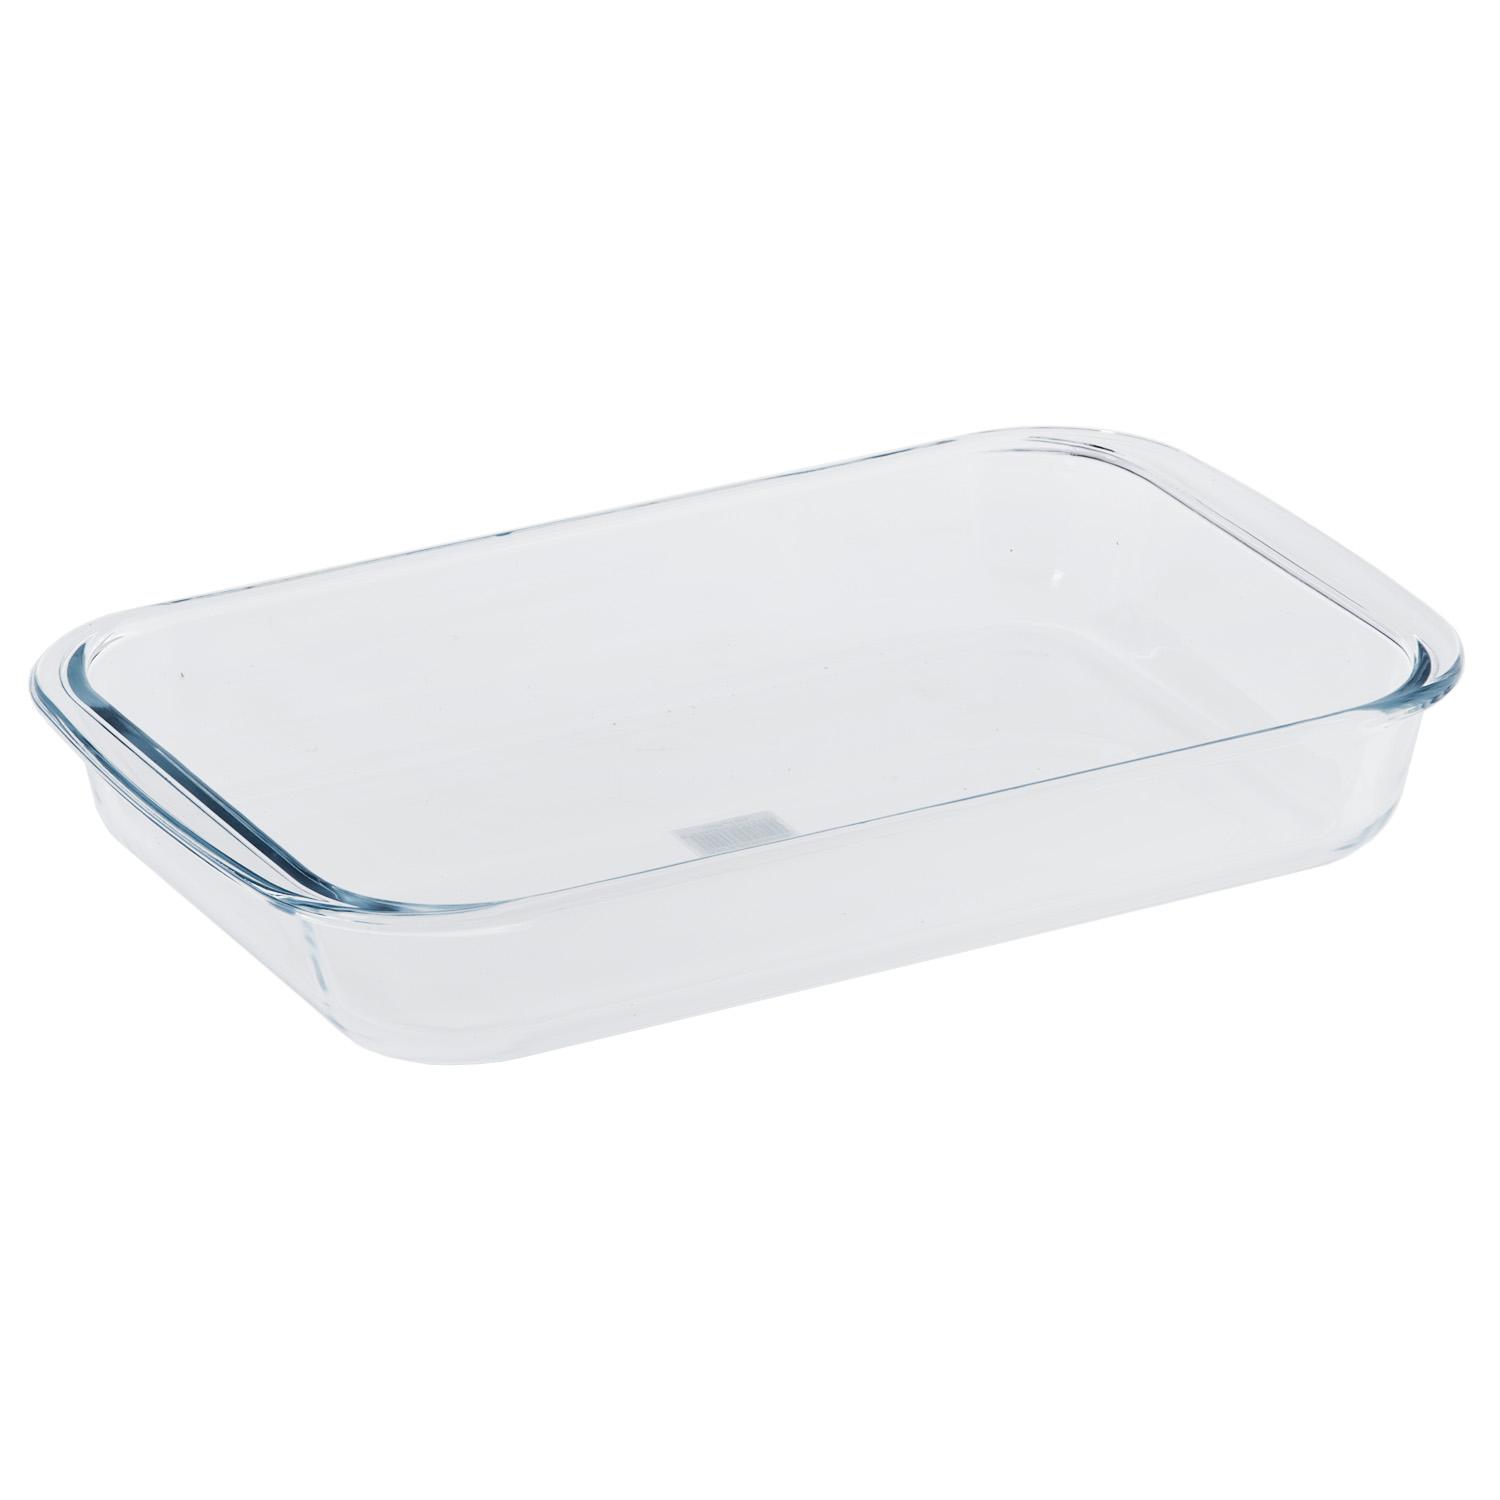 Royalford 1.8L Glass Baking Tray - Square Roasting & Baking Tray - Oven Safe Glass Roaster Pan